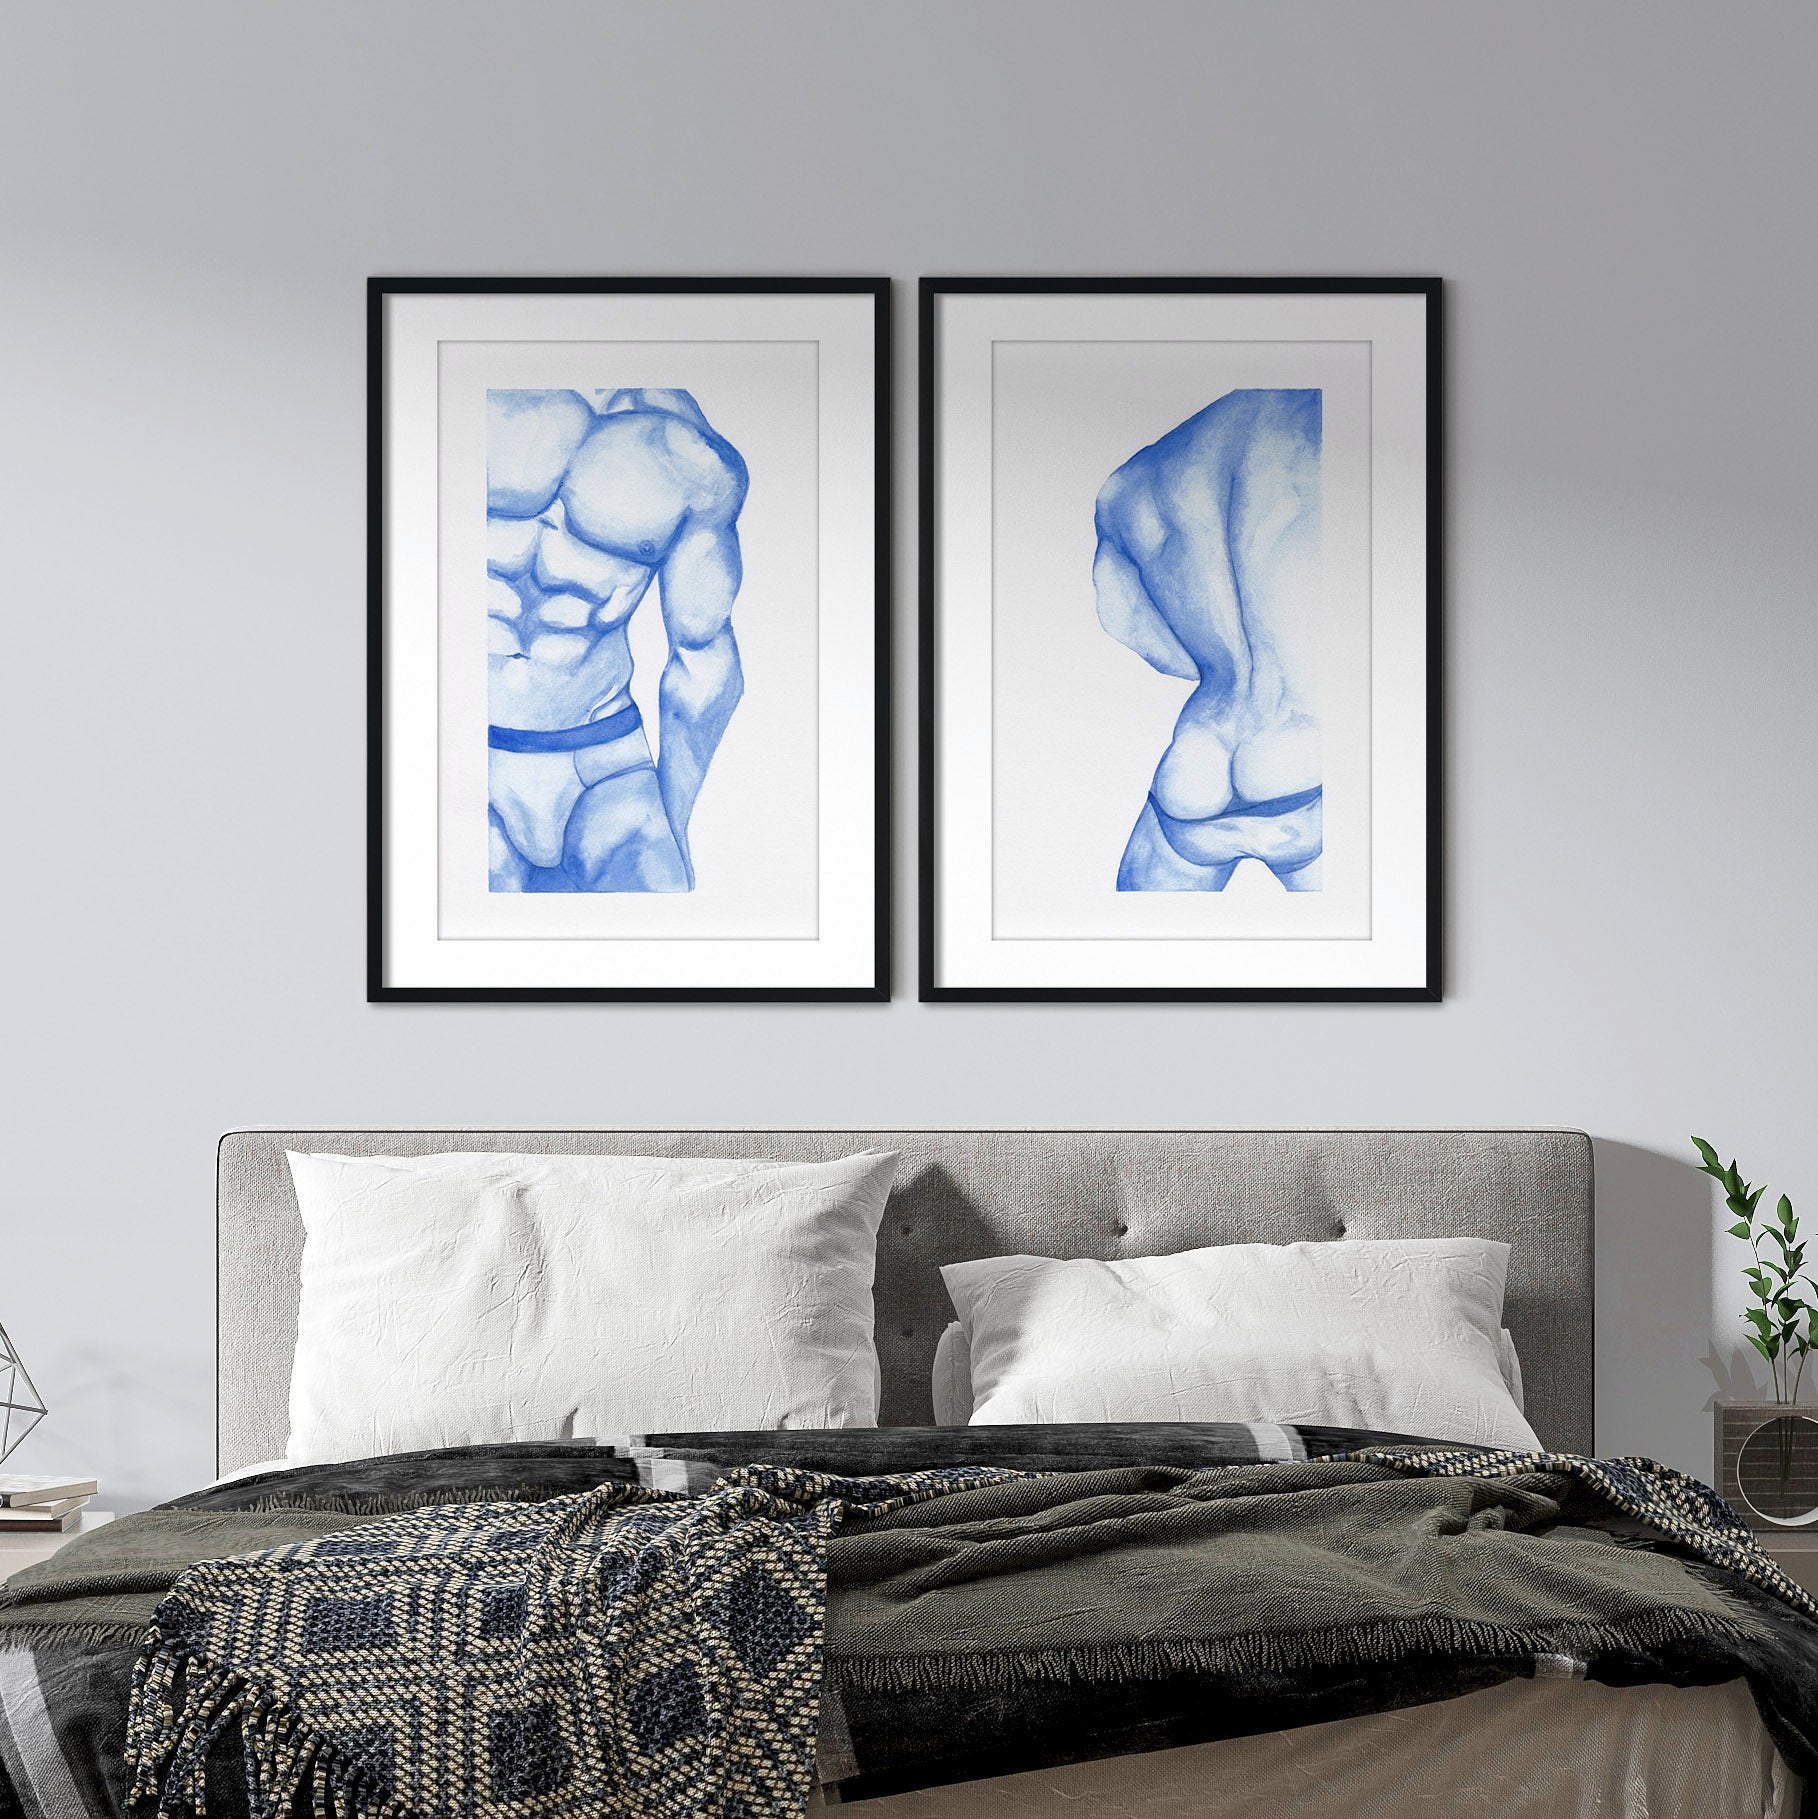 Gay wall art featuring nude men in watercolour